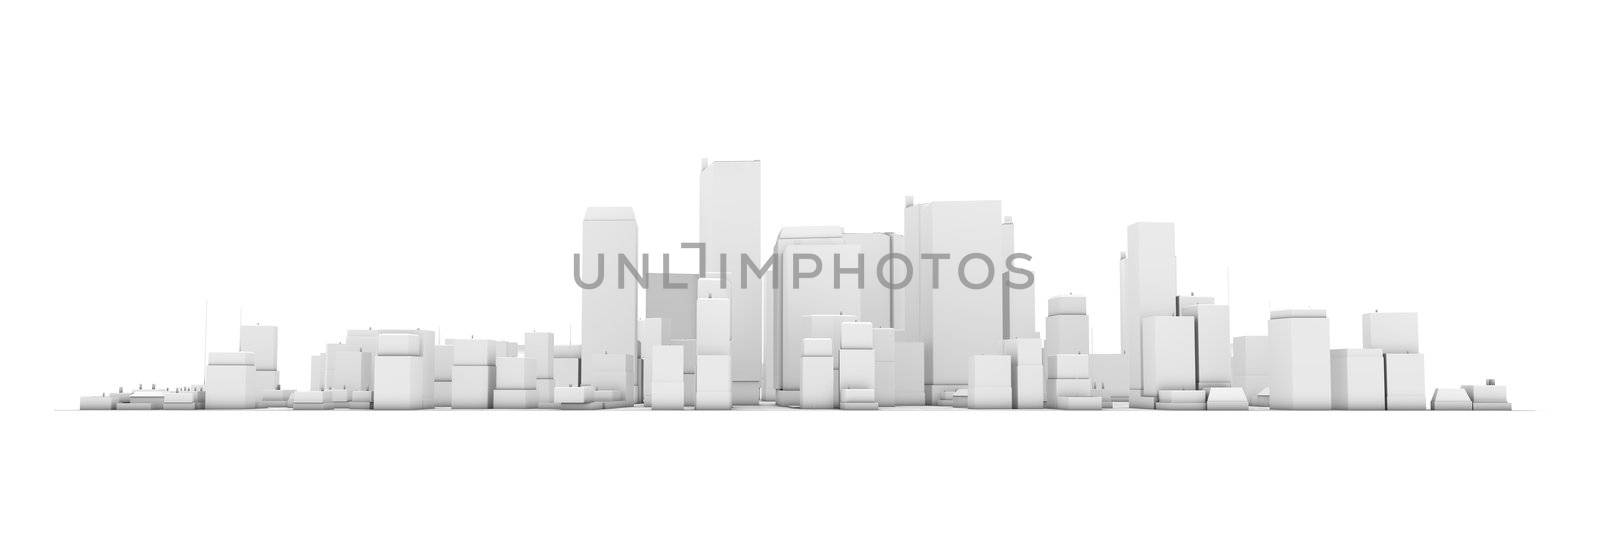 wide 3D cityscape model in white with a white background - buildings are casting no shadows